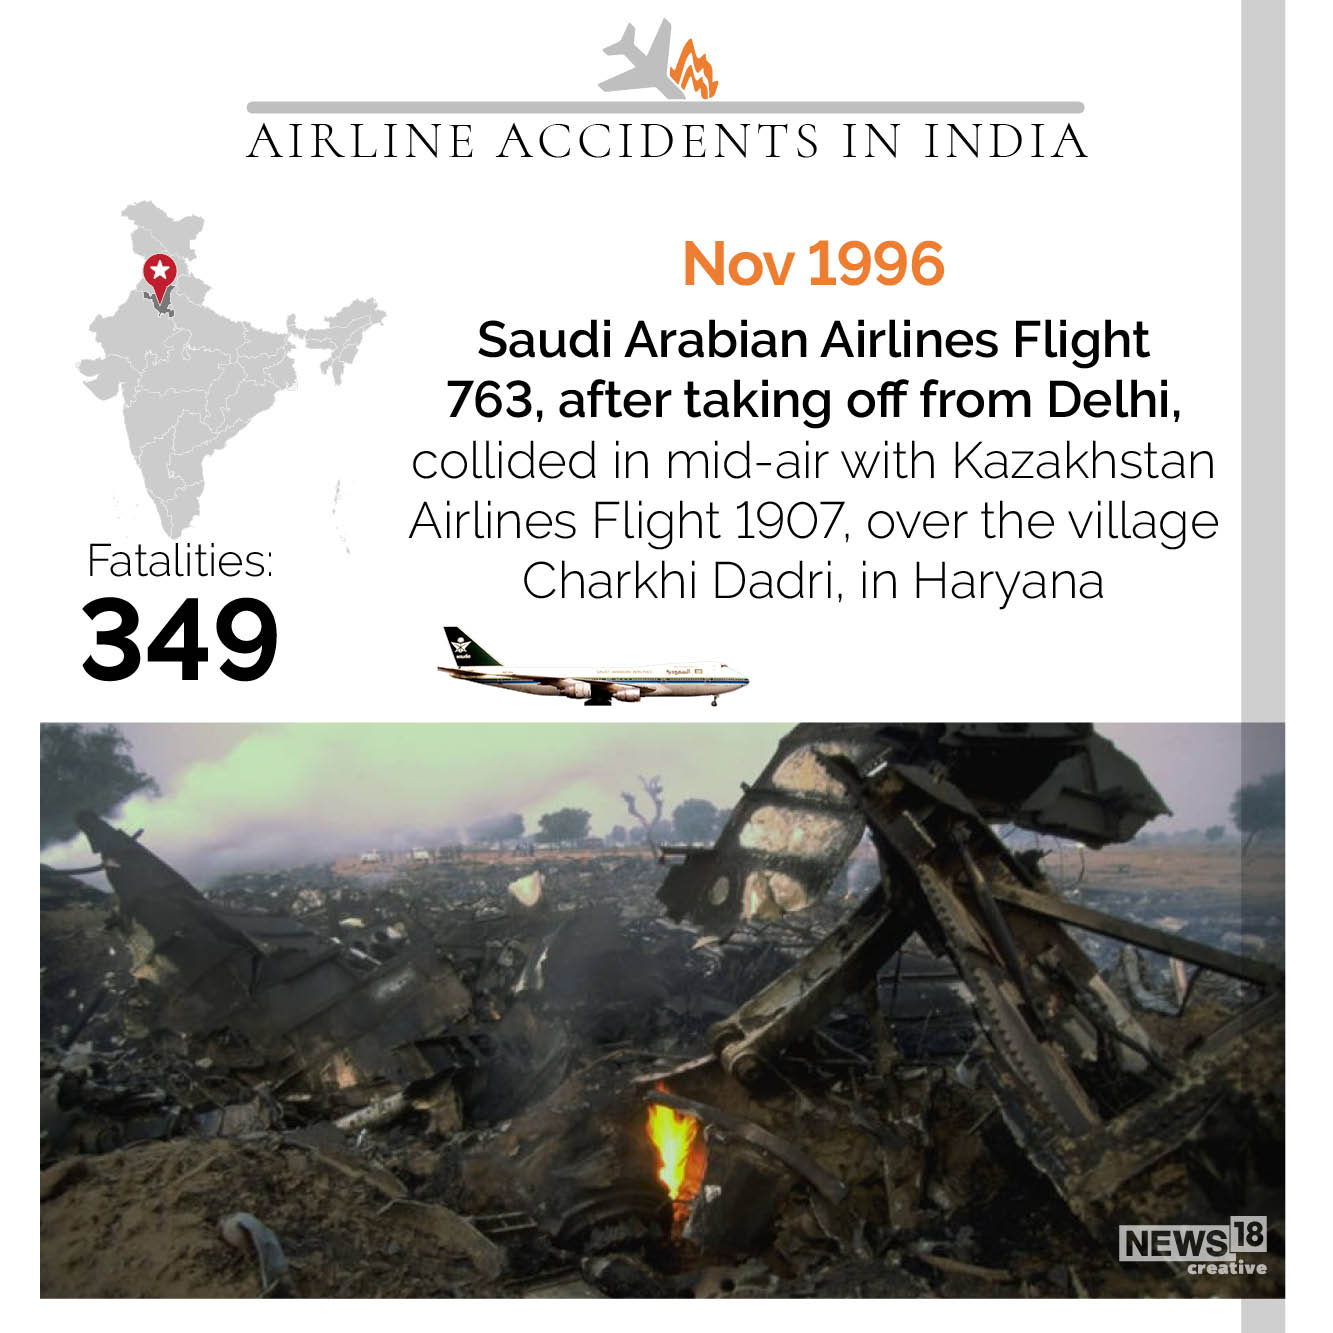 Kerala air crash: A look at India's history with plane accidents